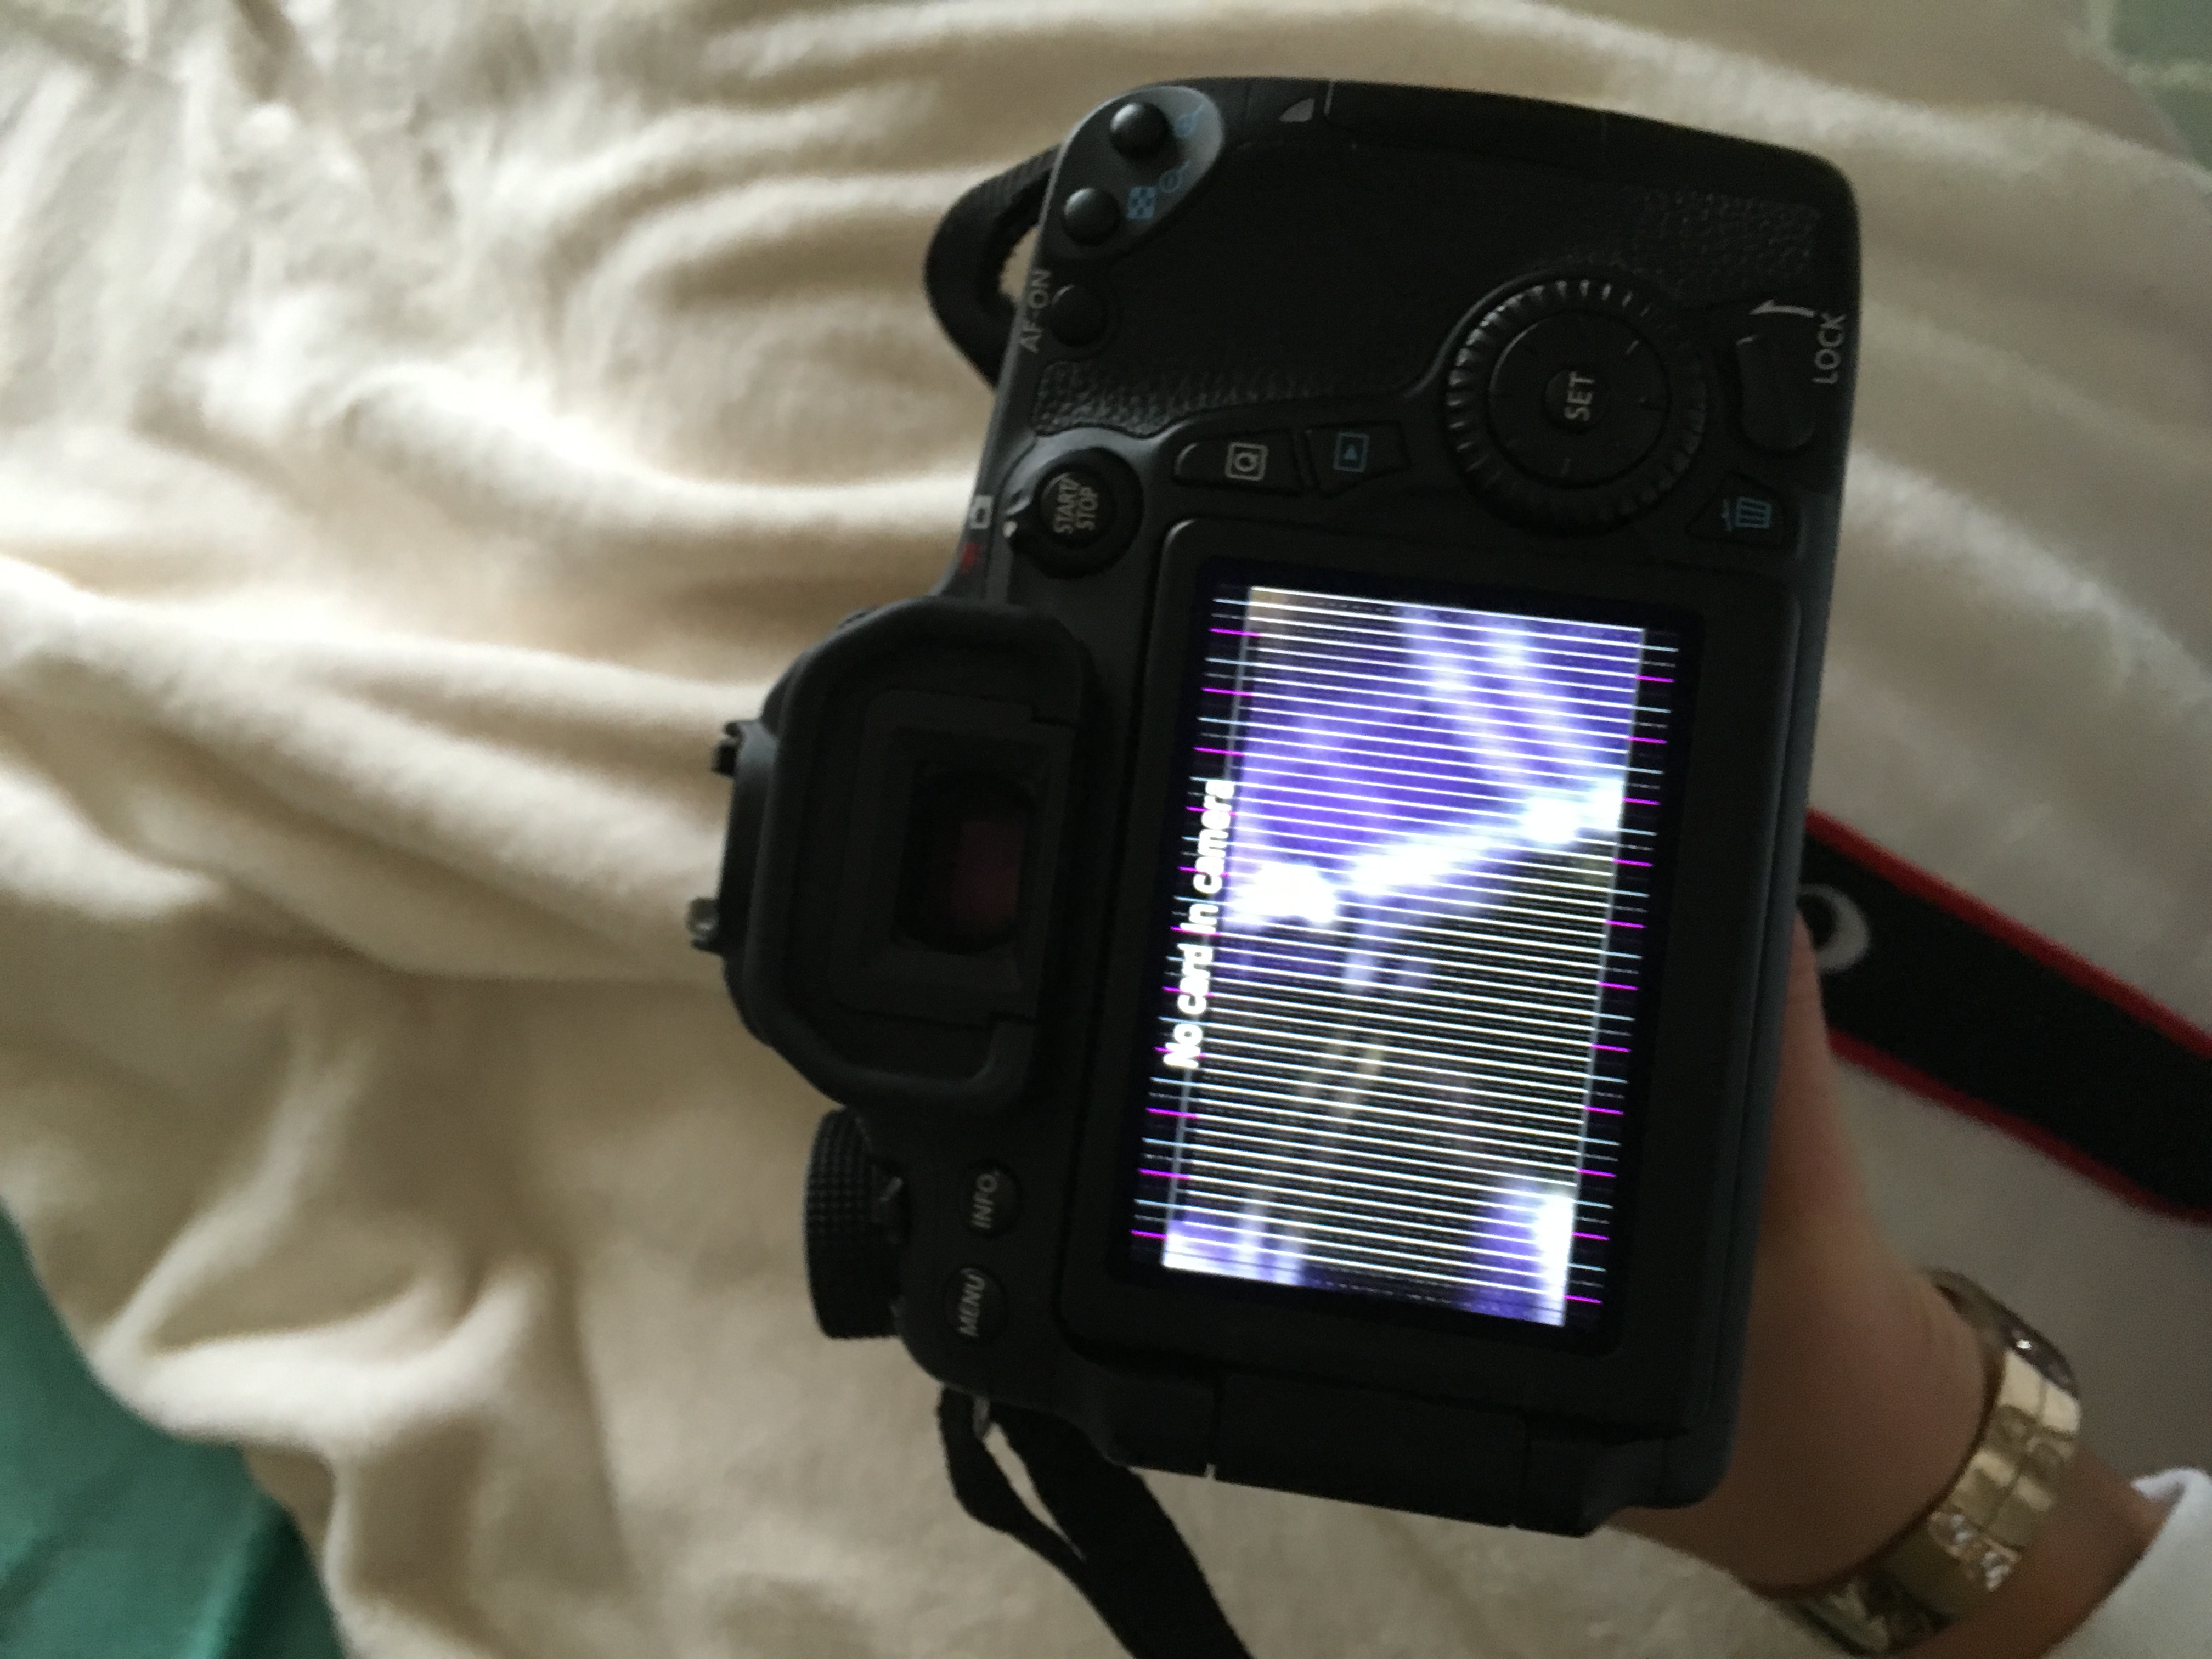 EOS 70D Video Problem: Yesterday screen about a mi - Canon Community